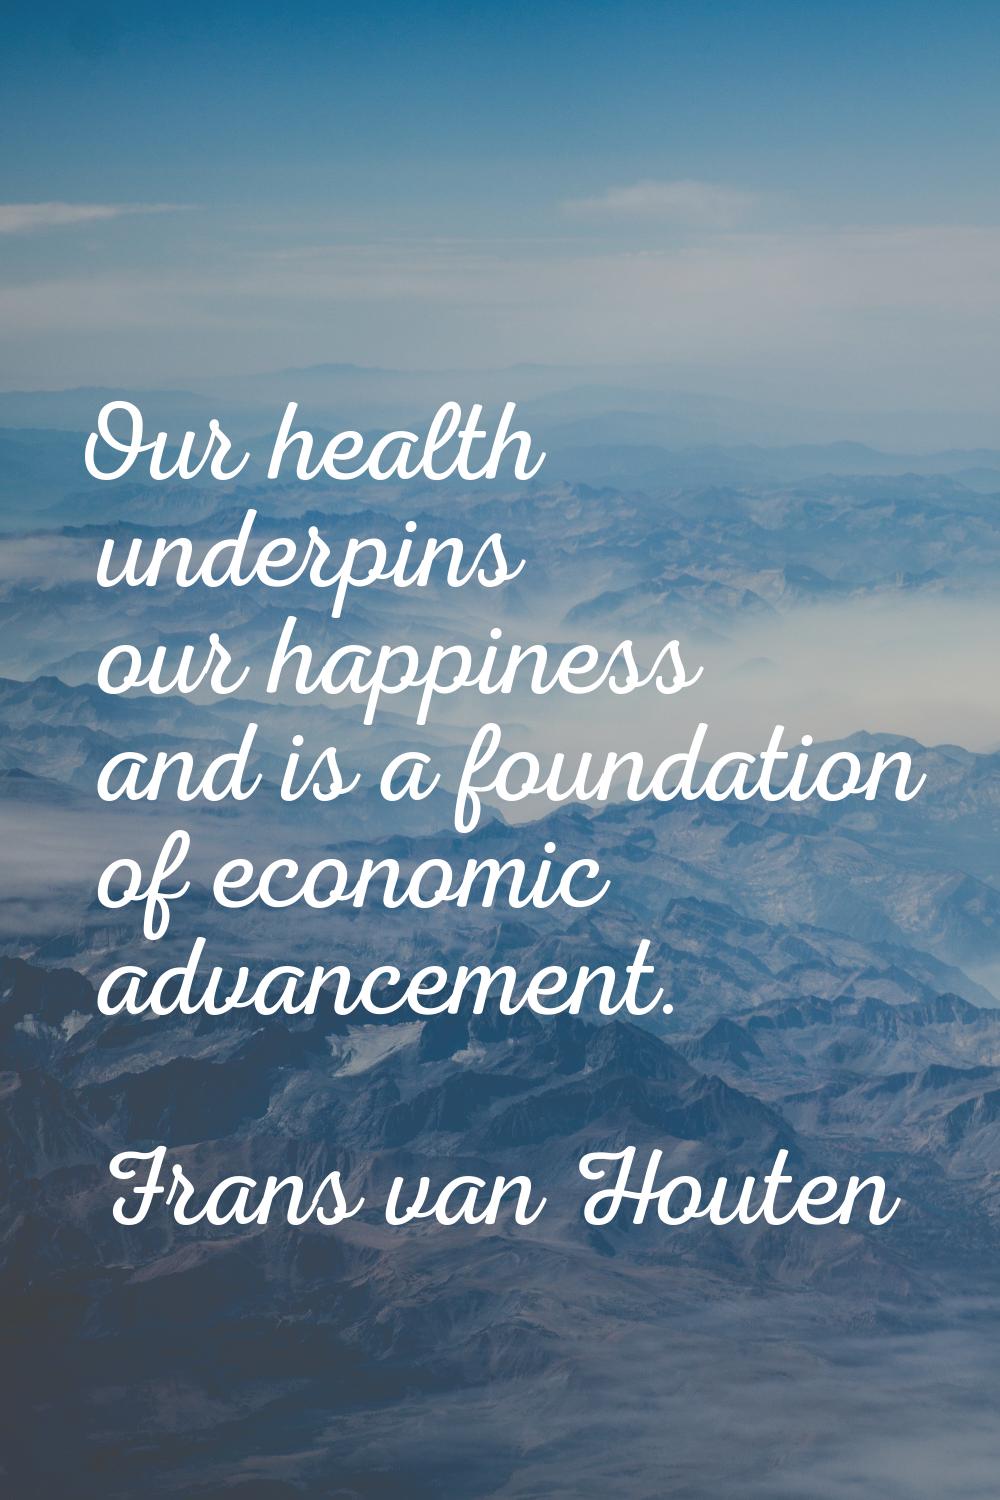 Our health underpins our happiness and is a foundation of economic advancement.